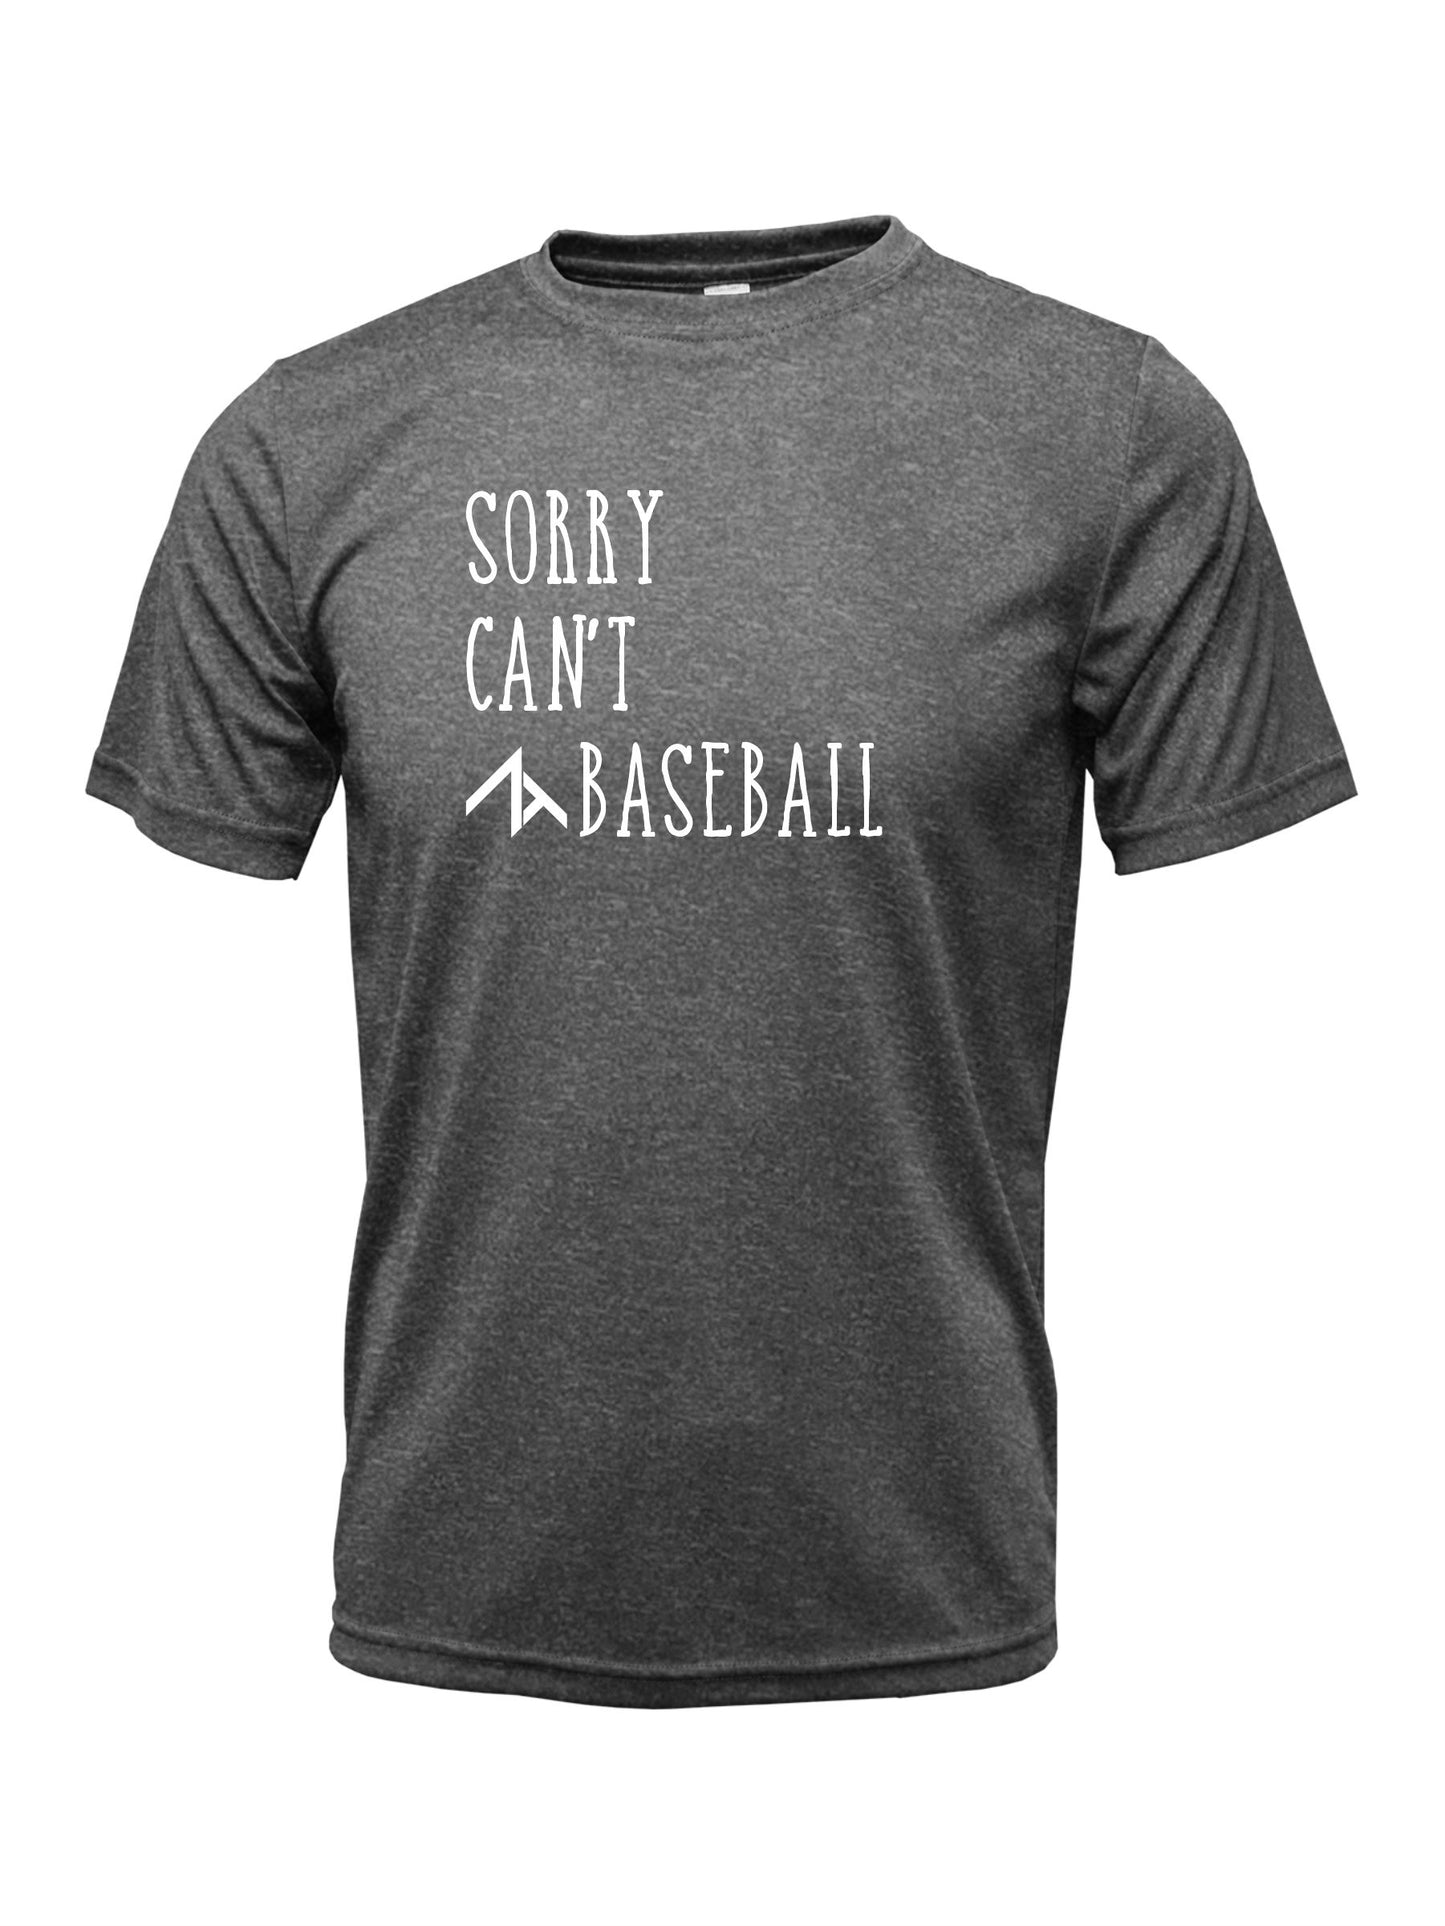 Short Sleeve "SORRY CAN'T" Dri-Fit T-shirt